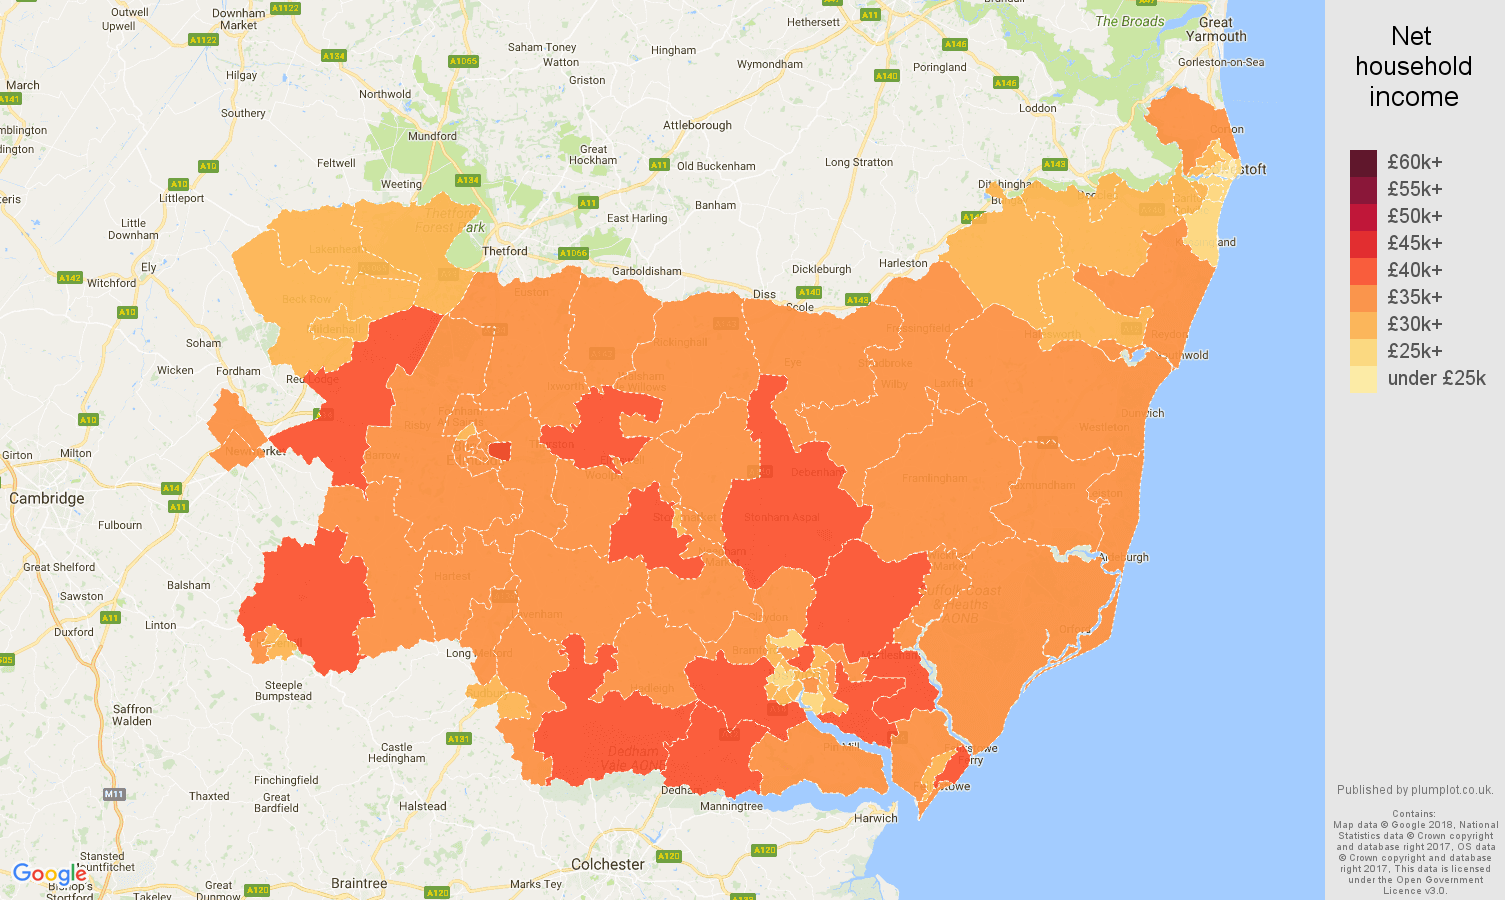 Suffolk net household income map